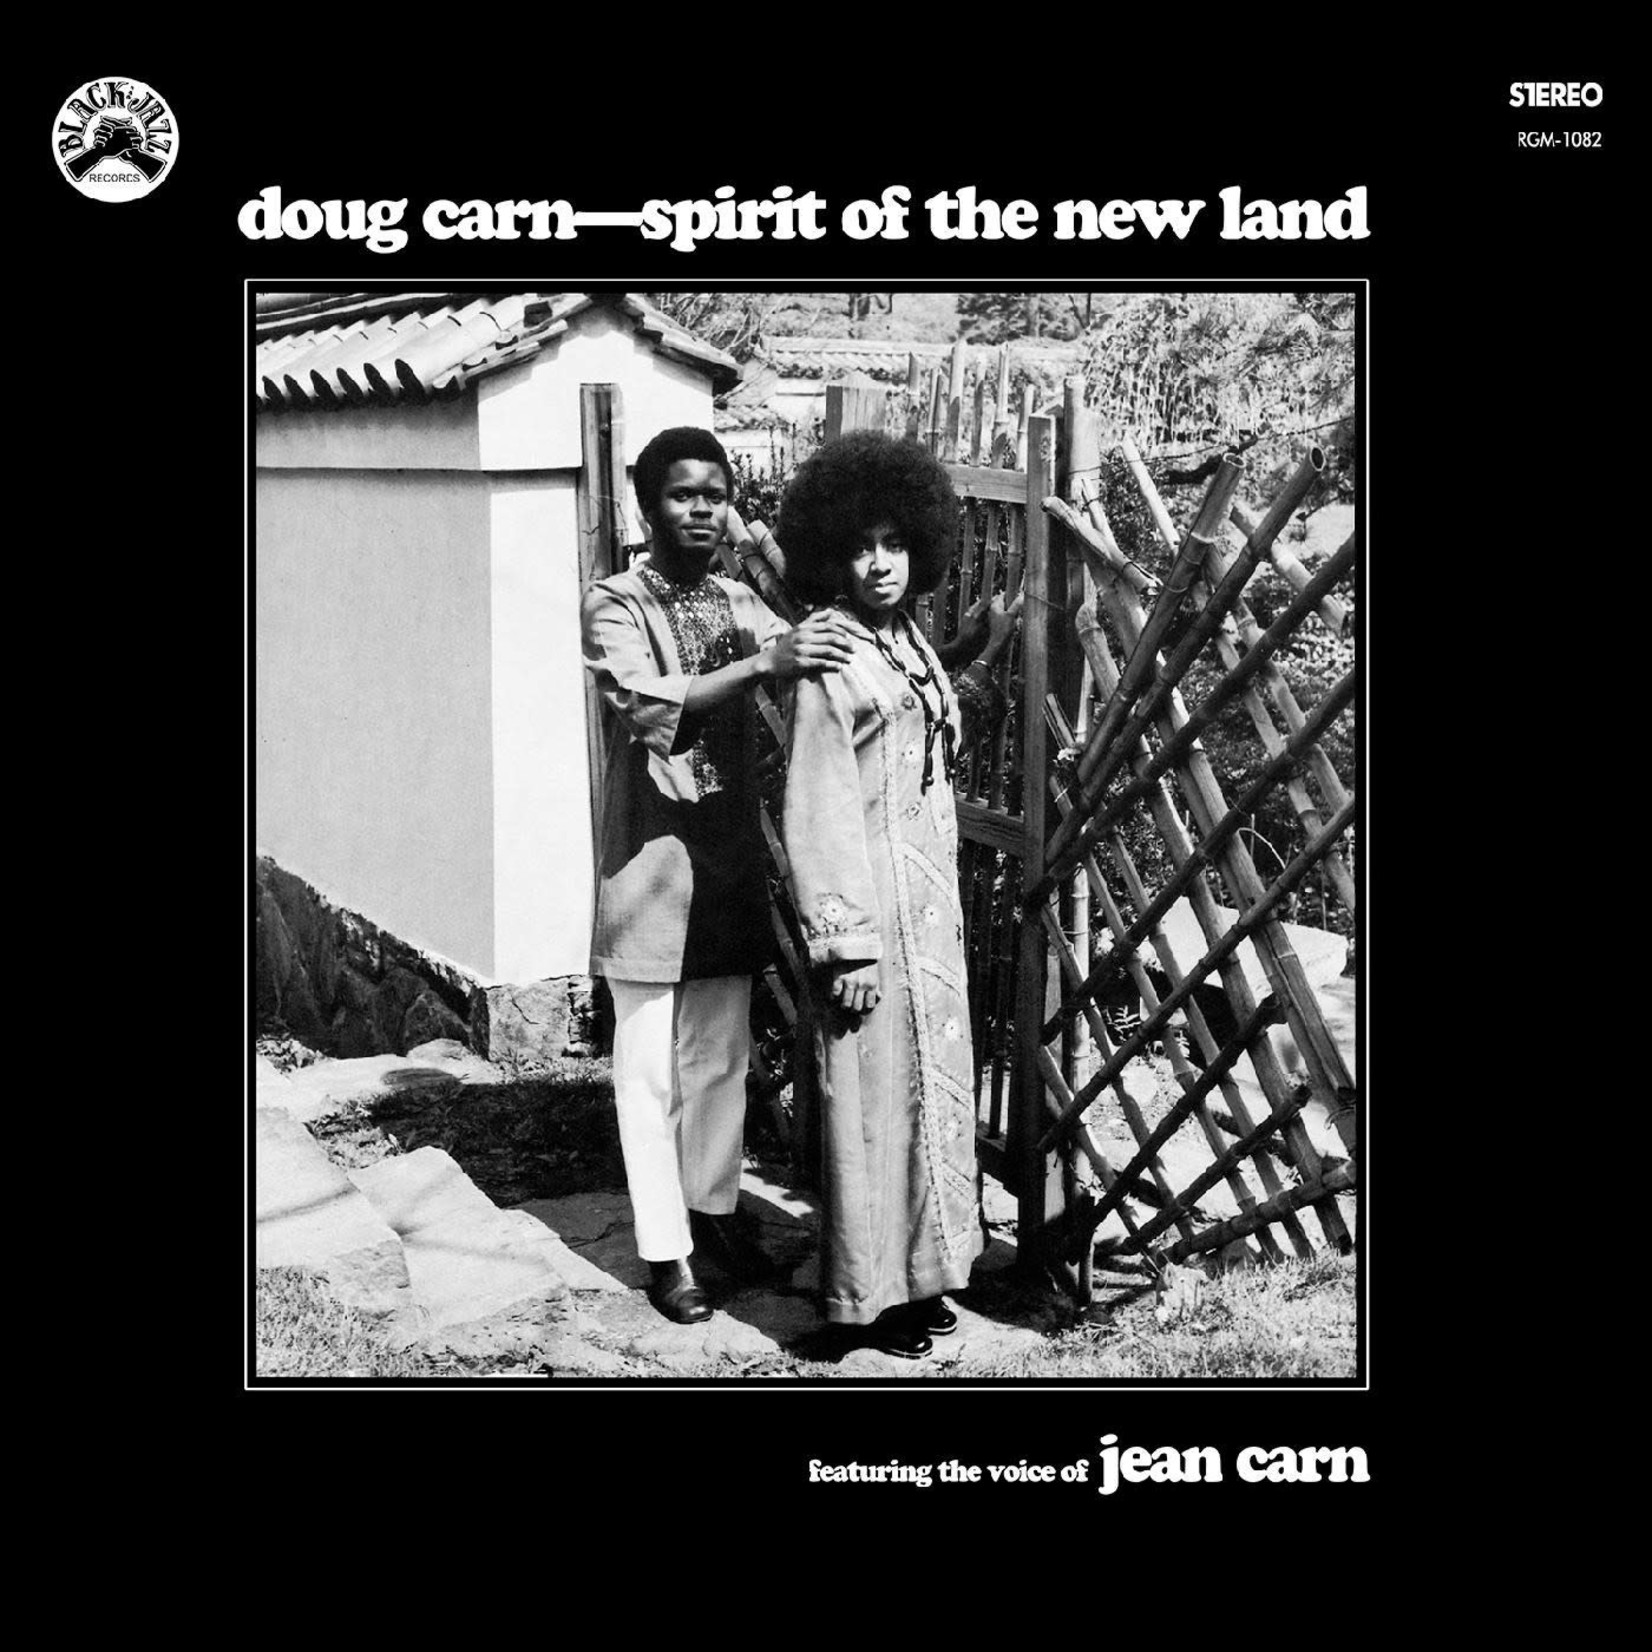 Carn, Doug Featuring the Voice of Jean Carn: Spirit of the New Land (remastered vinyl edition) [REAL GONE MUSIC]